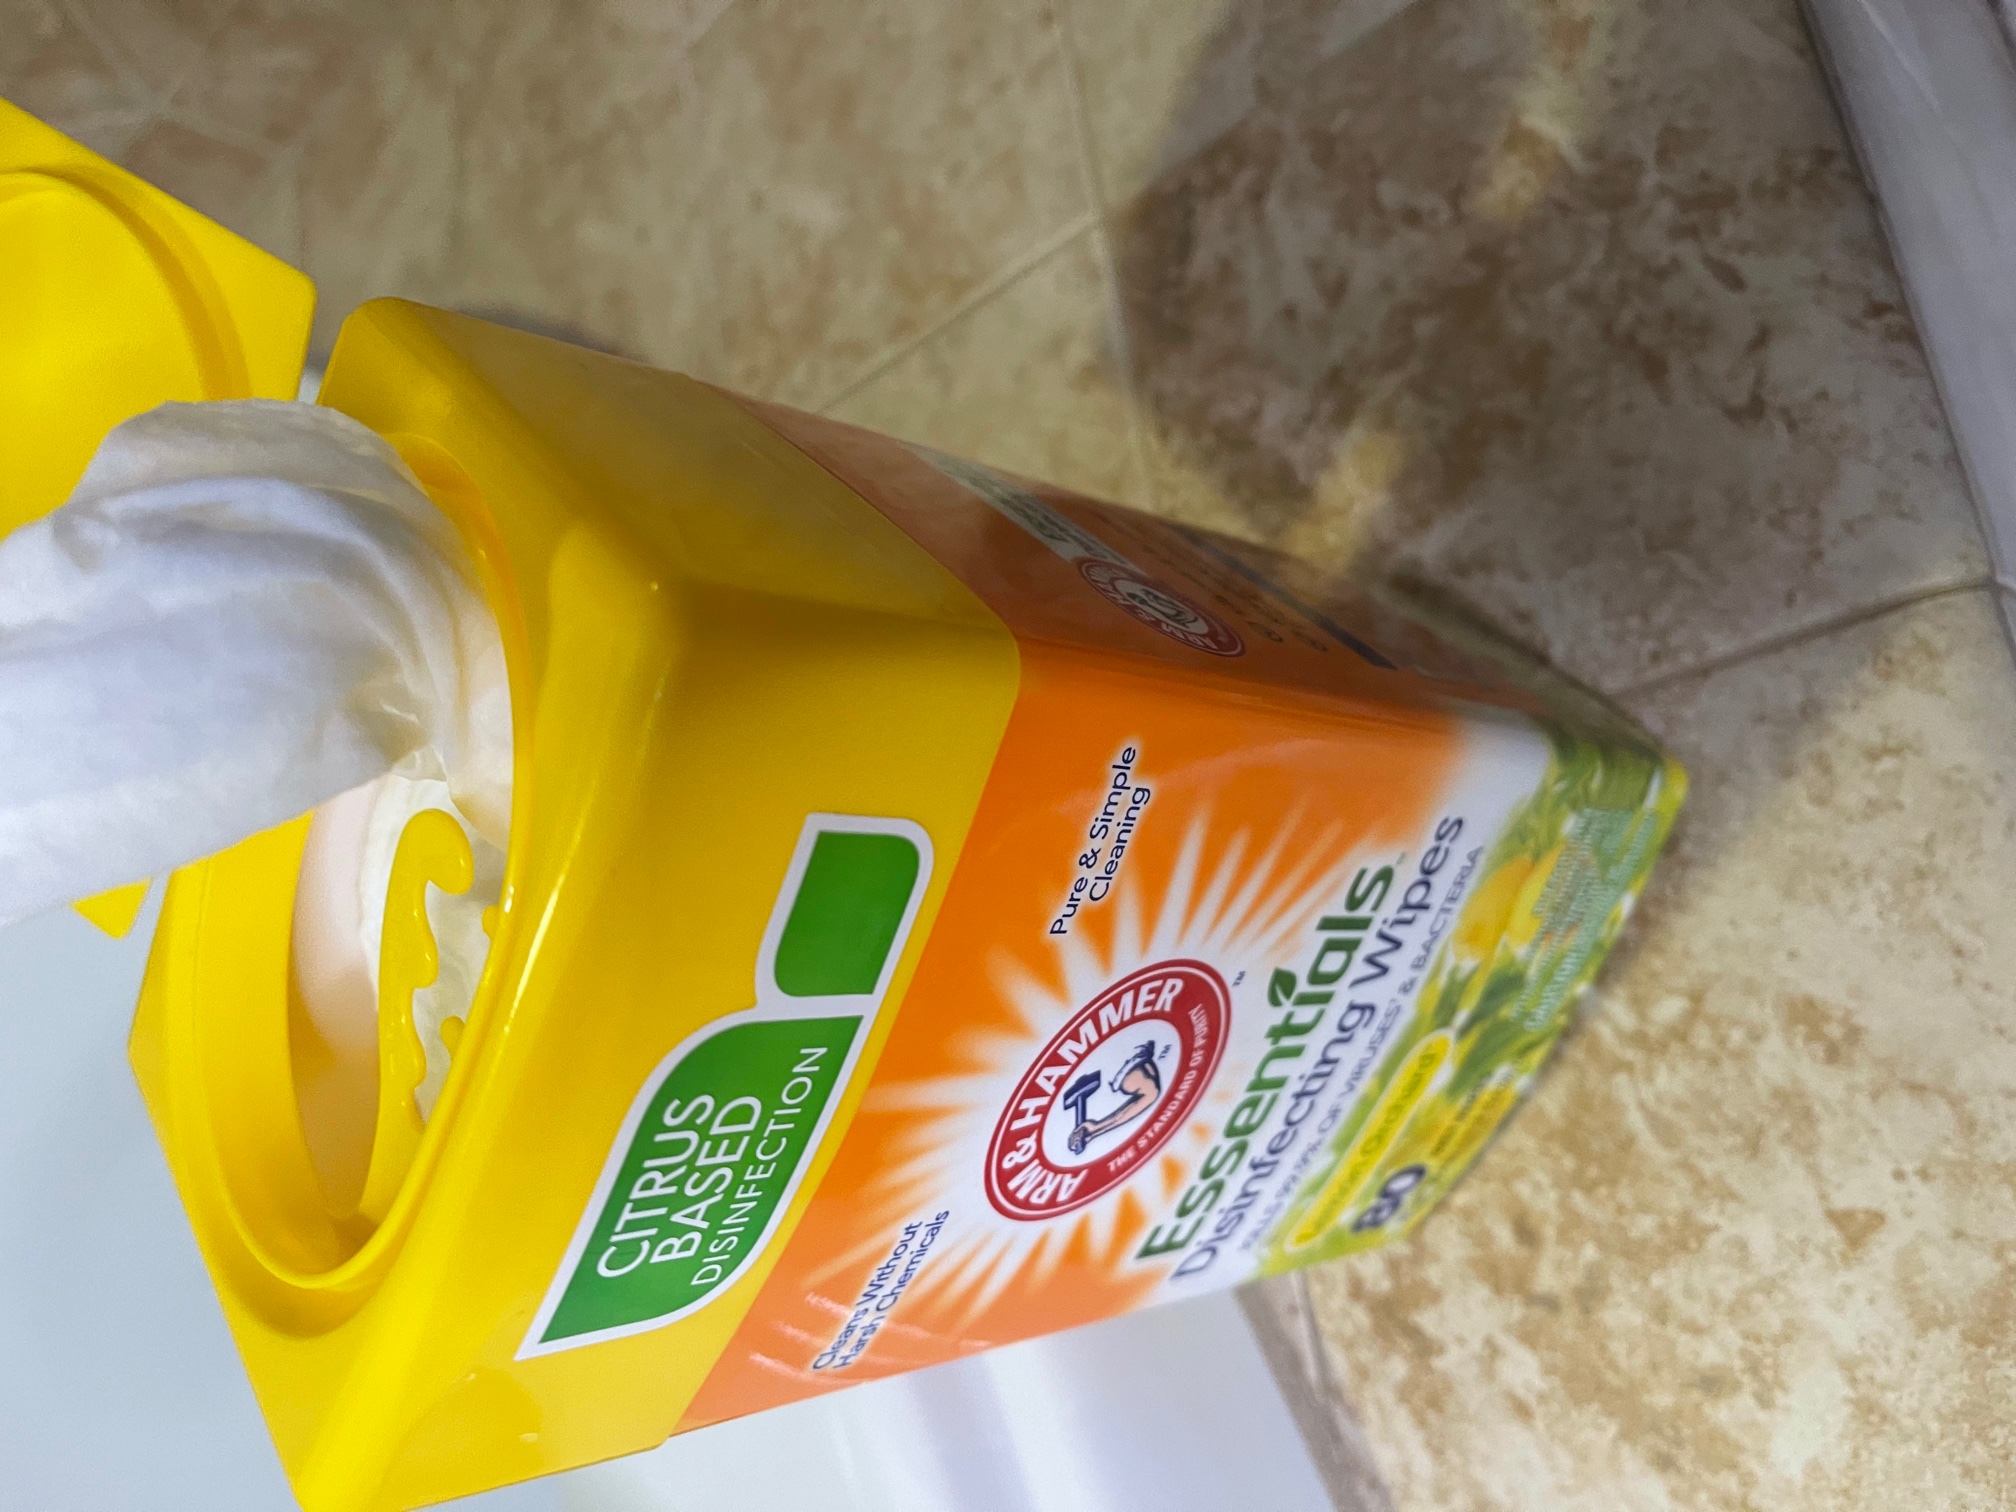 Arm and Hammer disinfecting wipes